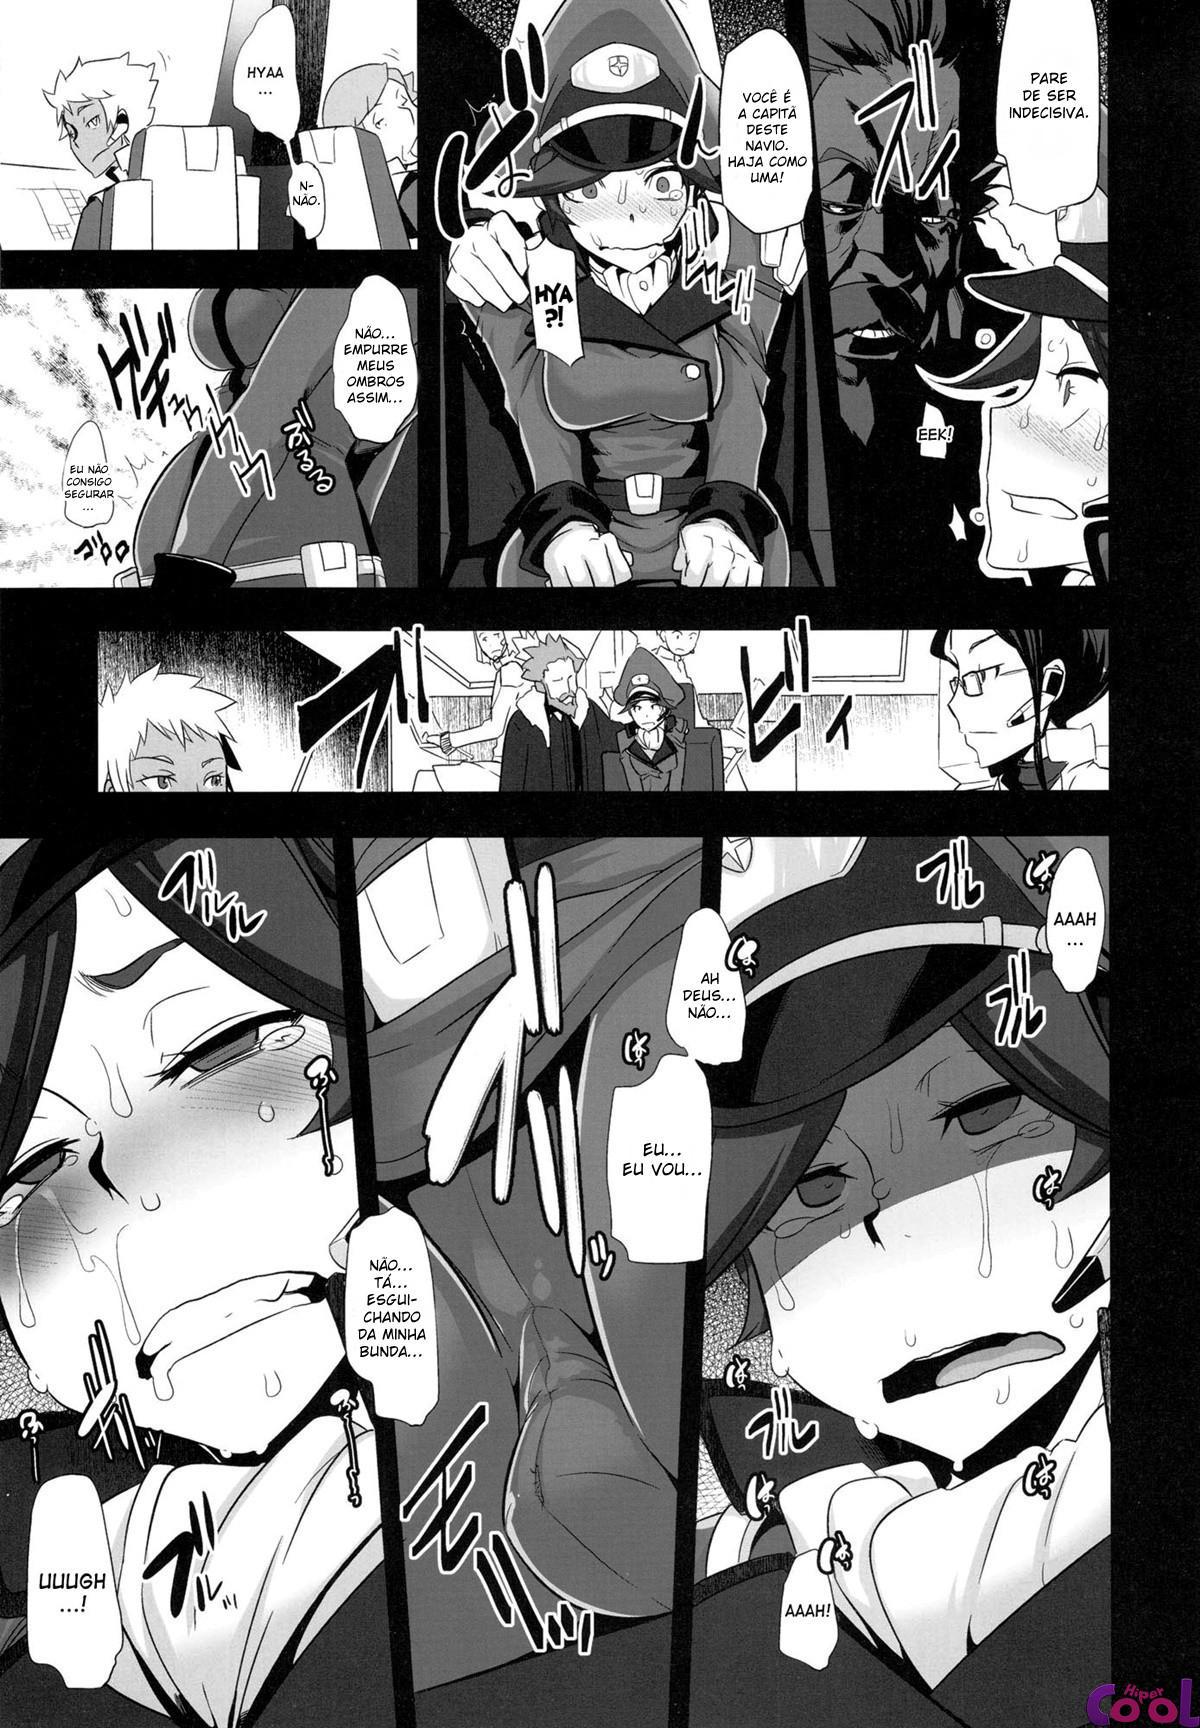 dame-kanchou-or-useless-captain-chapter-01-page-12.jpg